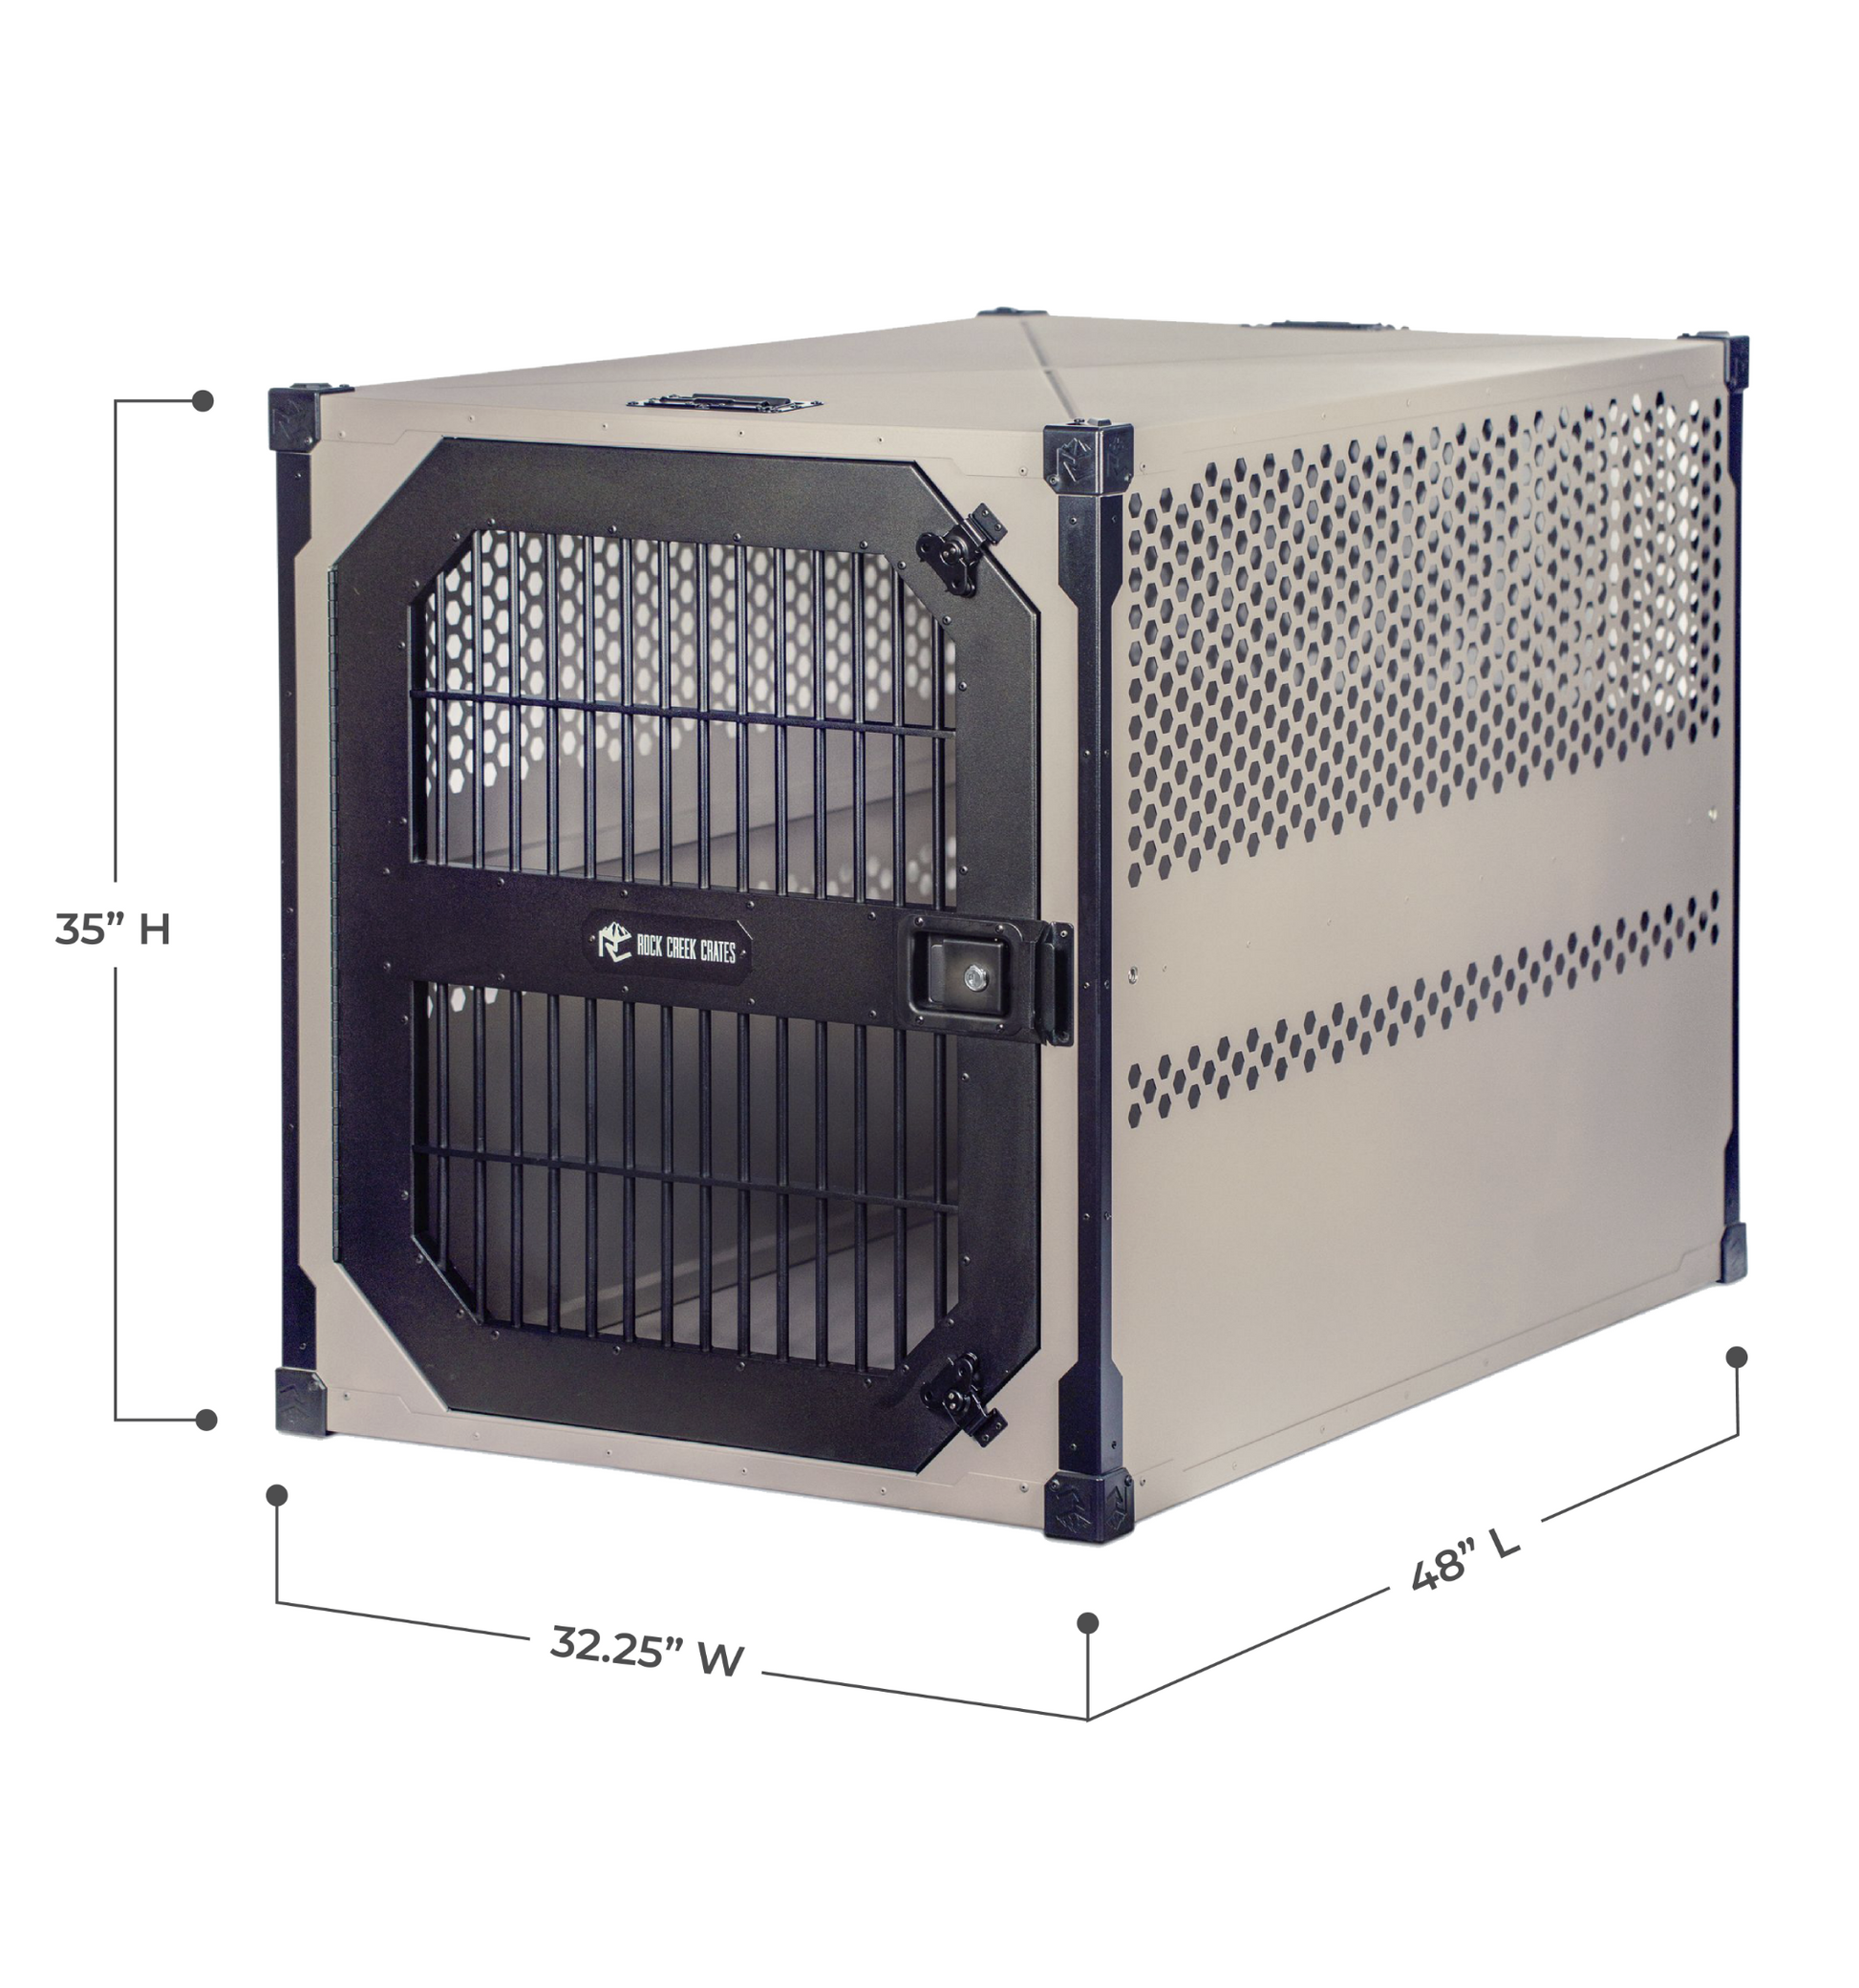 XXL Grey Stationary dog crate by Rock Creek Crates